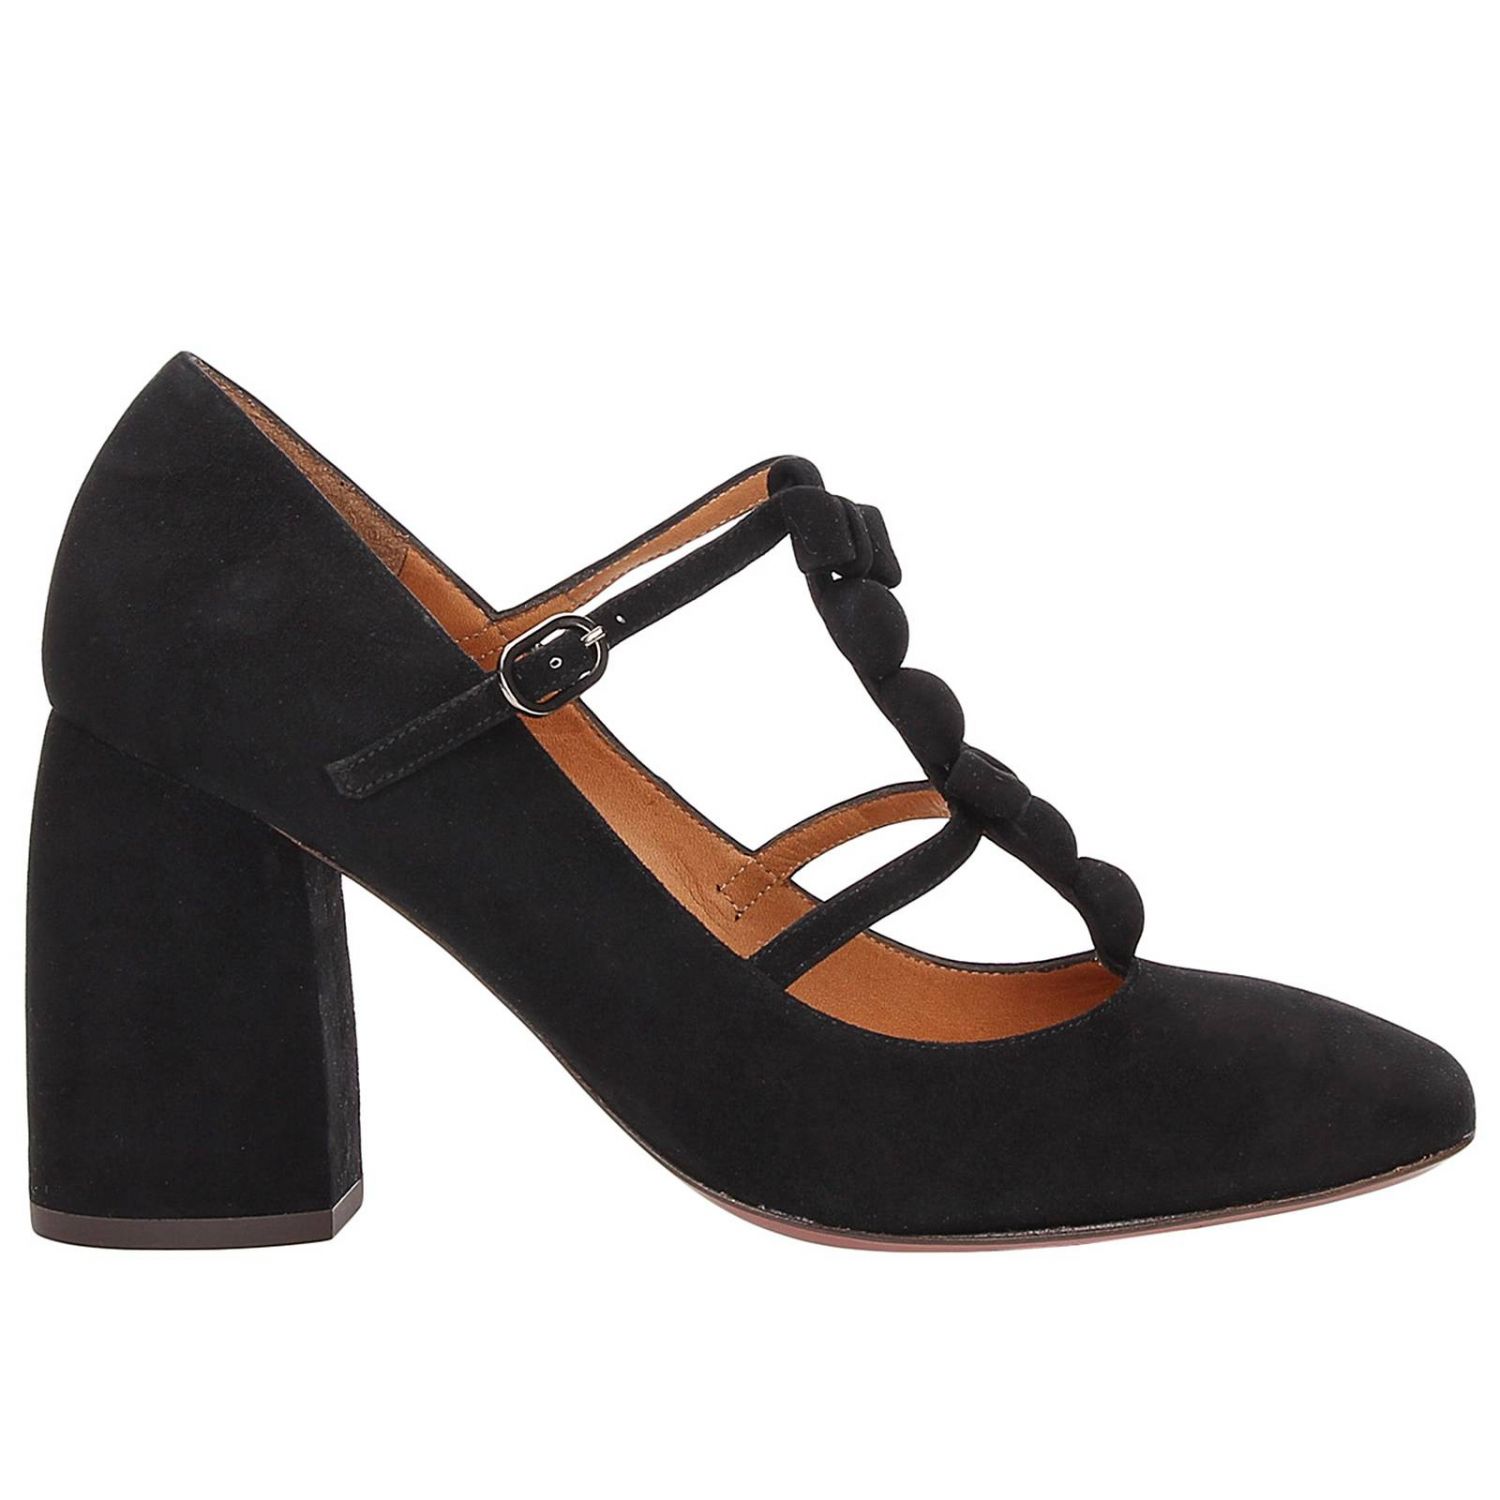 Chie Mihara Outlet: high heel shoes for woman - Black | Chie Mihara ...